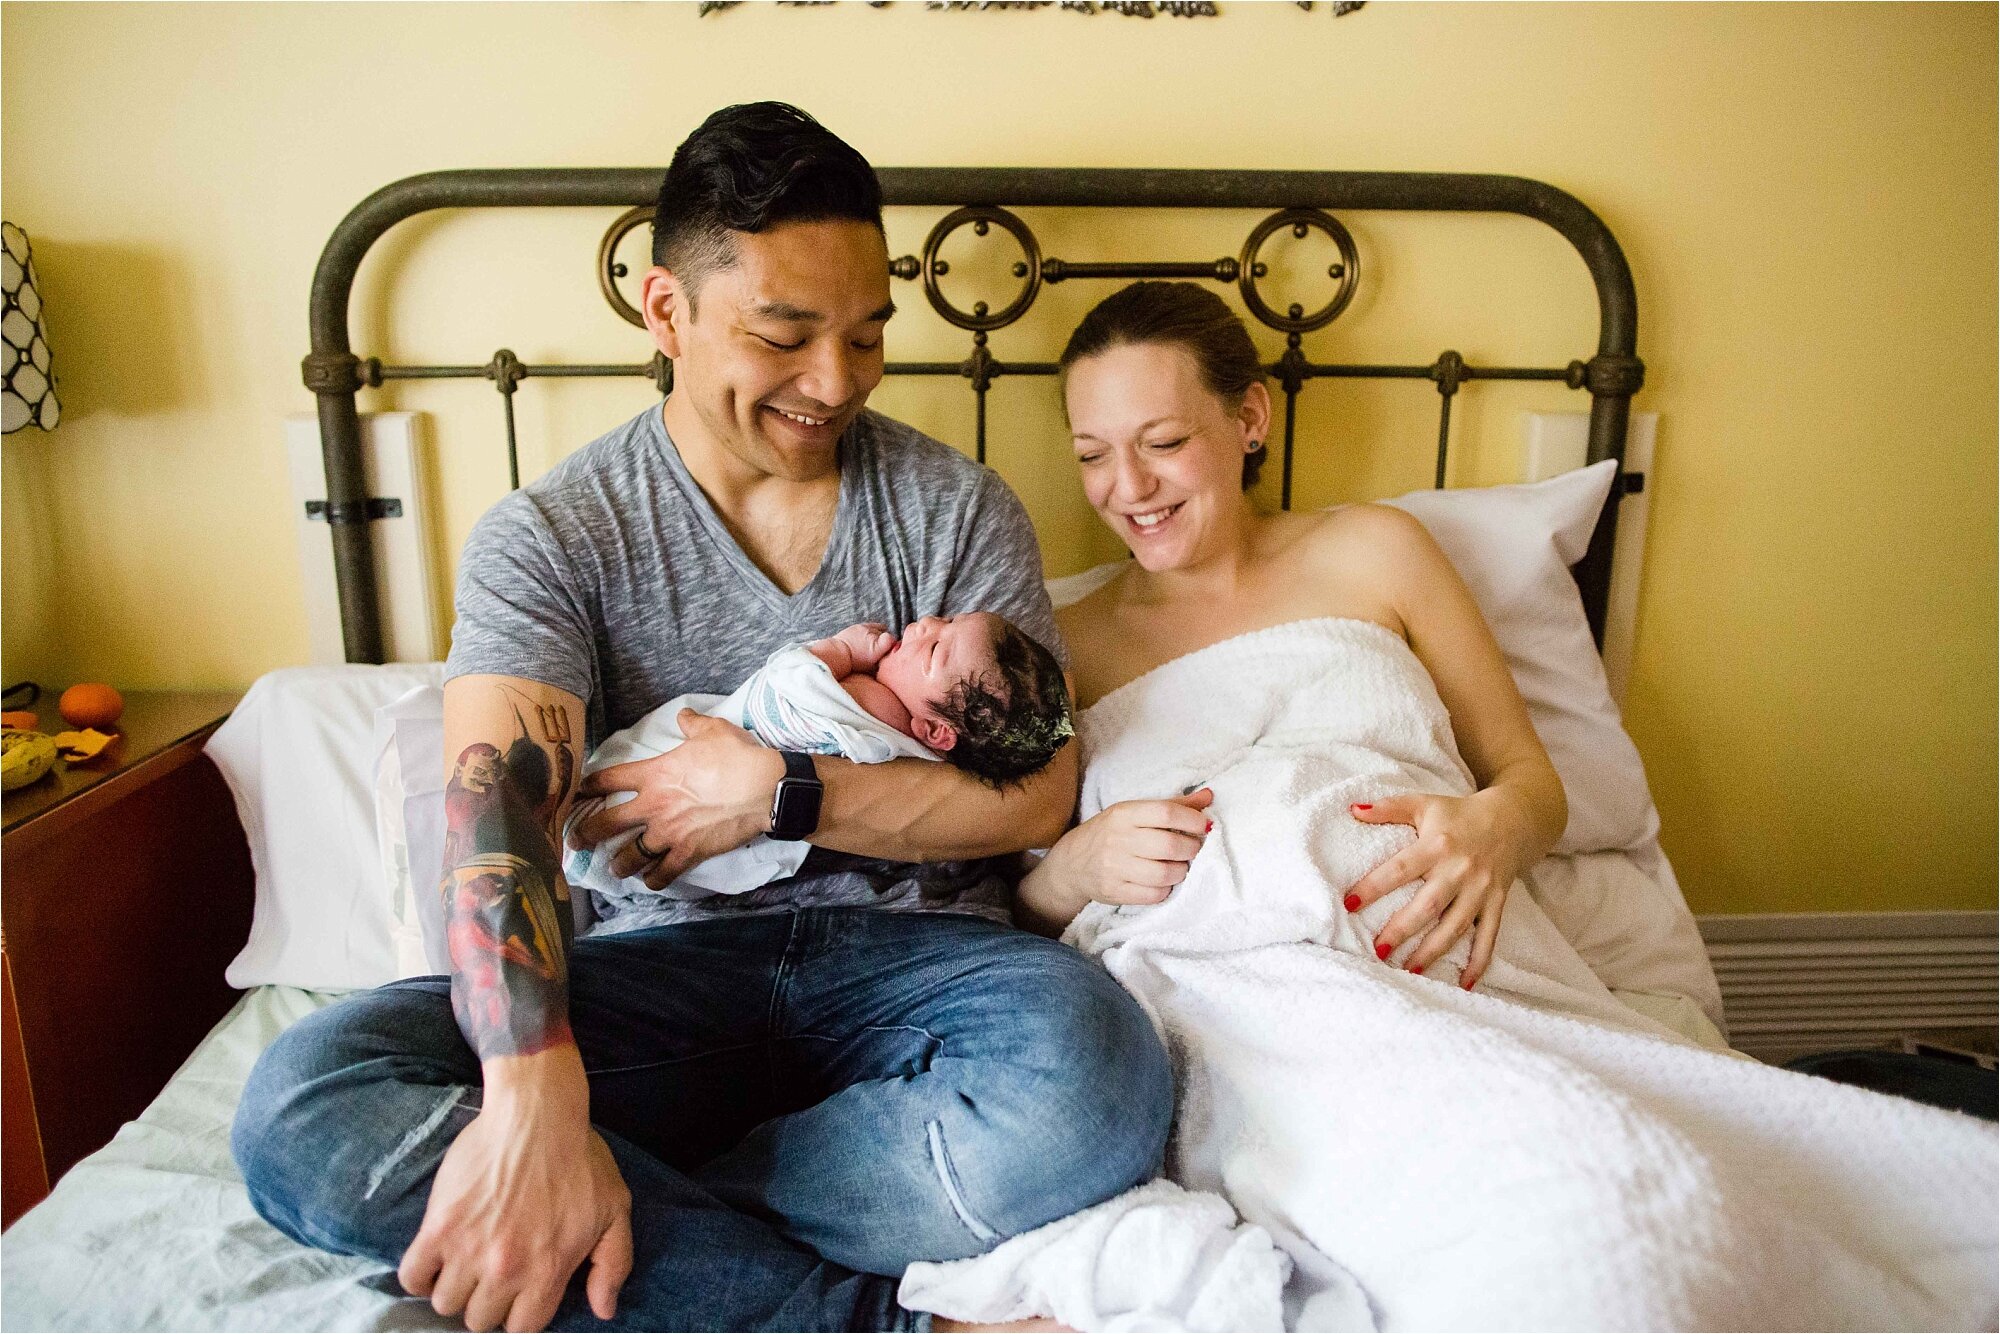 Mom and dad laugh together after their son is born, Philadelphia birth center photographer